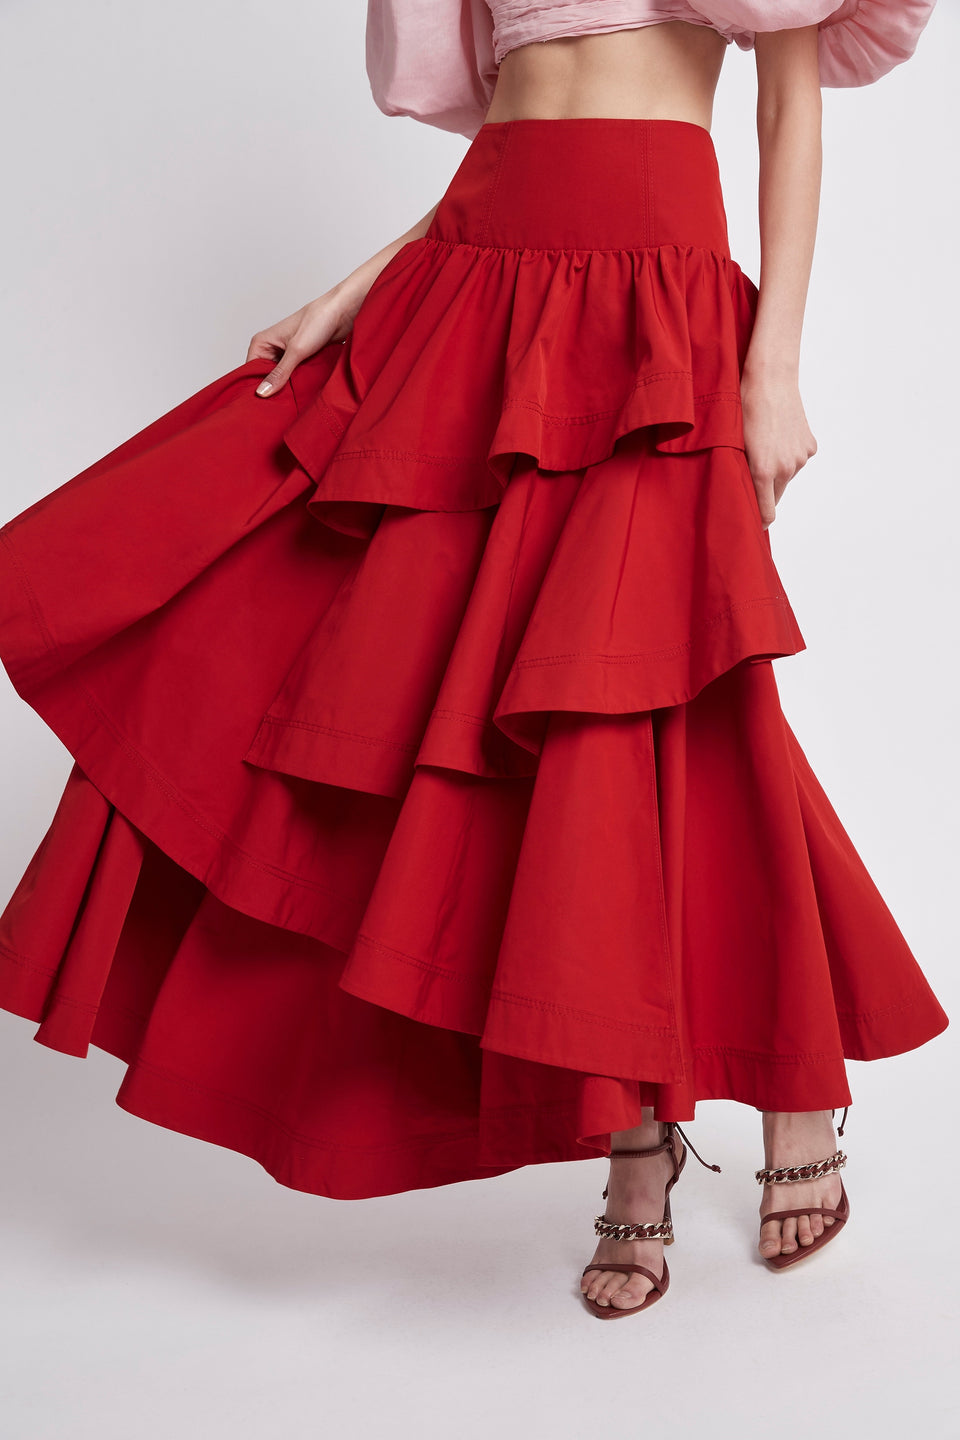 Aje COSMO Skirt Scarlet